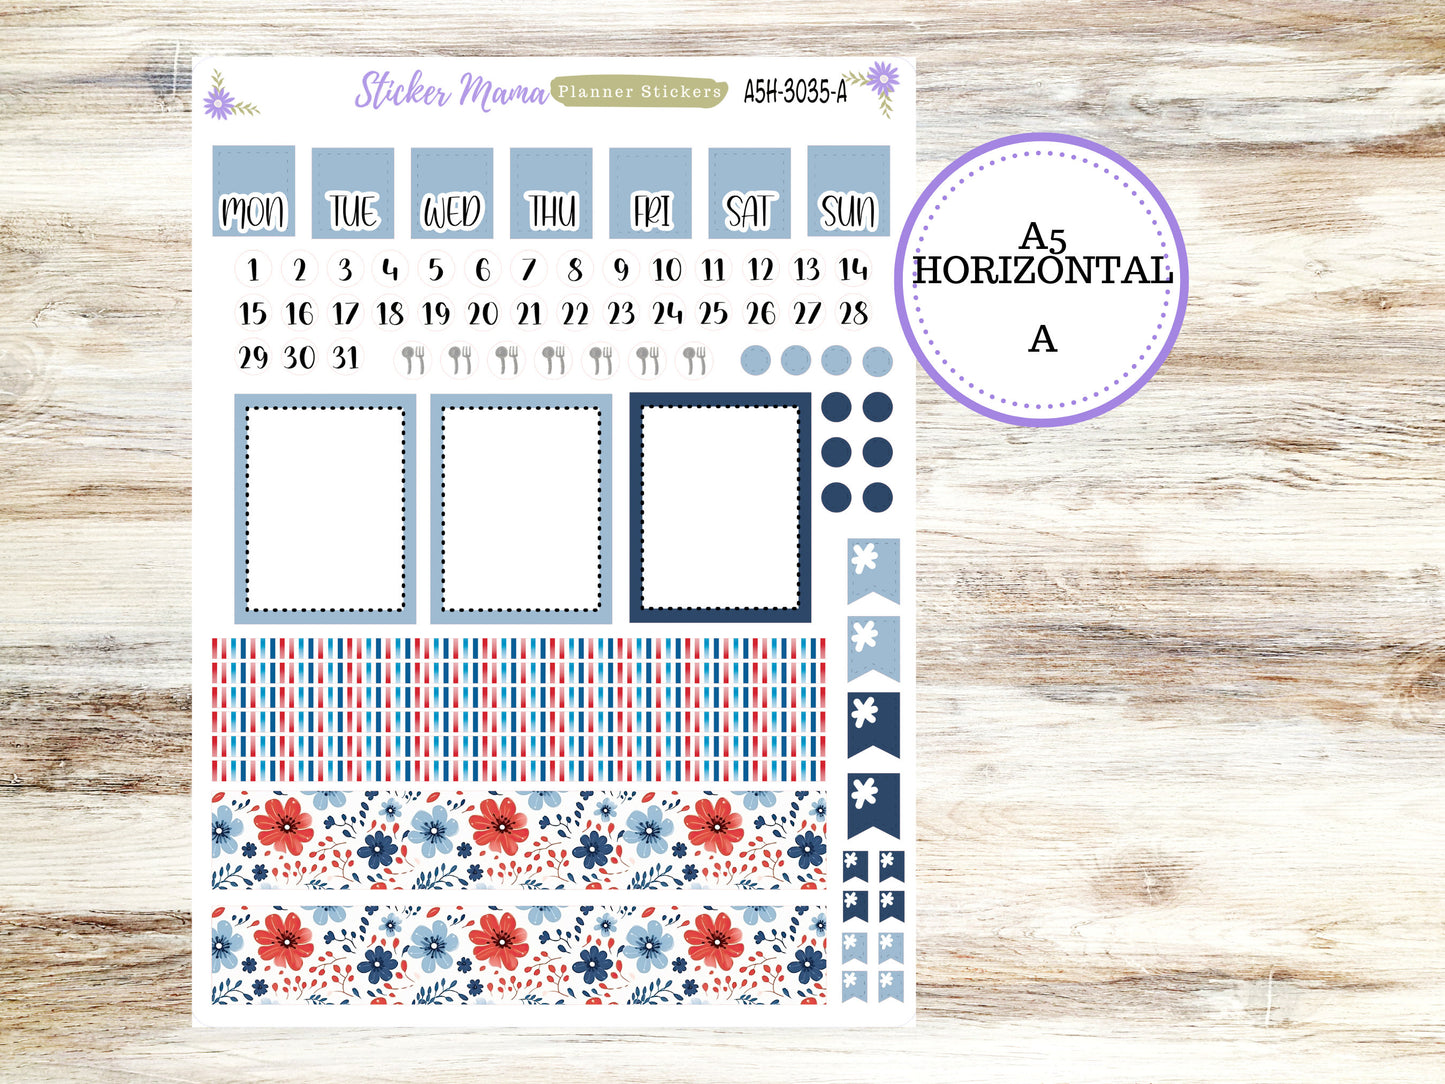 A5 Horizontal || #3035 || American Dream Kit || A5 Weekly Kit || Planner Stickers || Erin Condren A5 Horizontal Weekly Kit